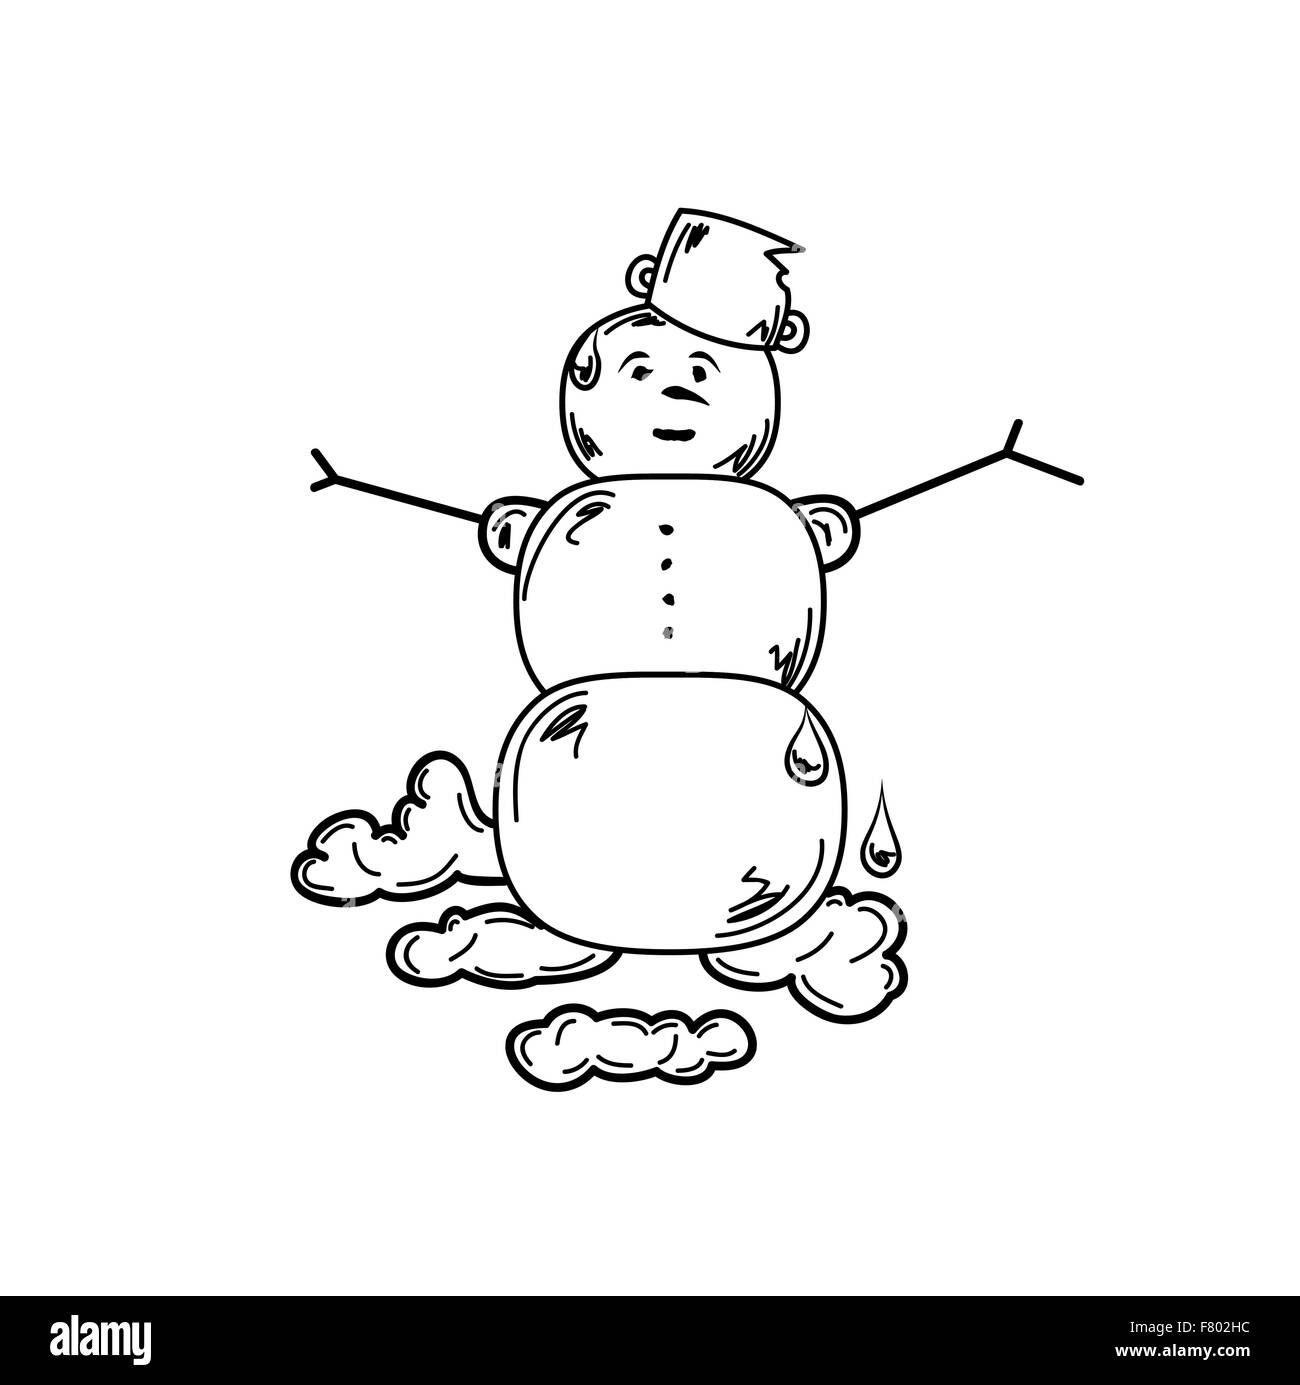 Melted snowman Black and White Stock Photos & Images - Alamy